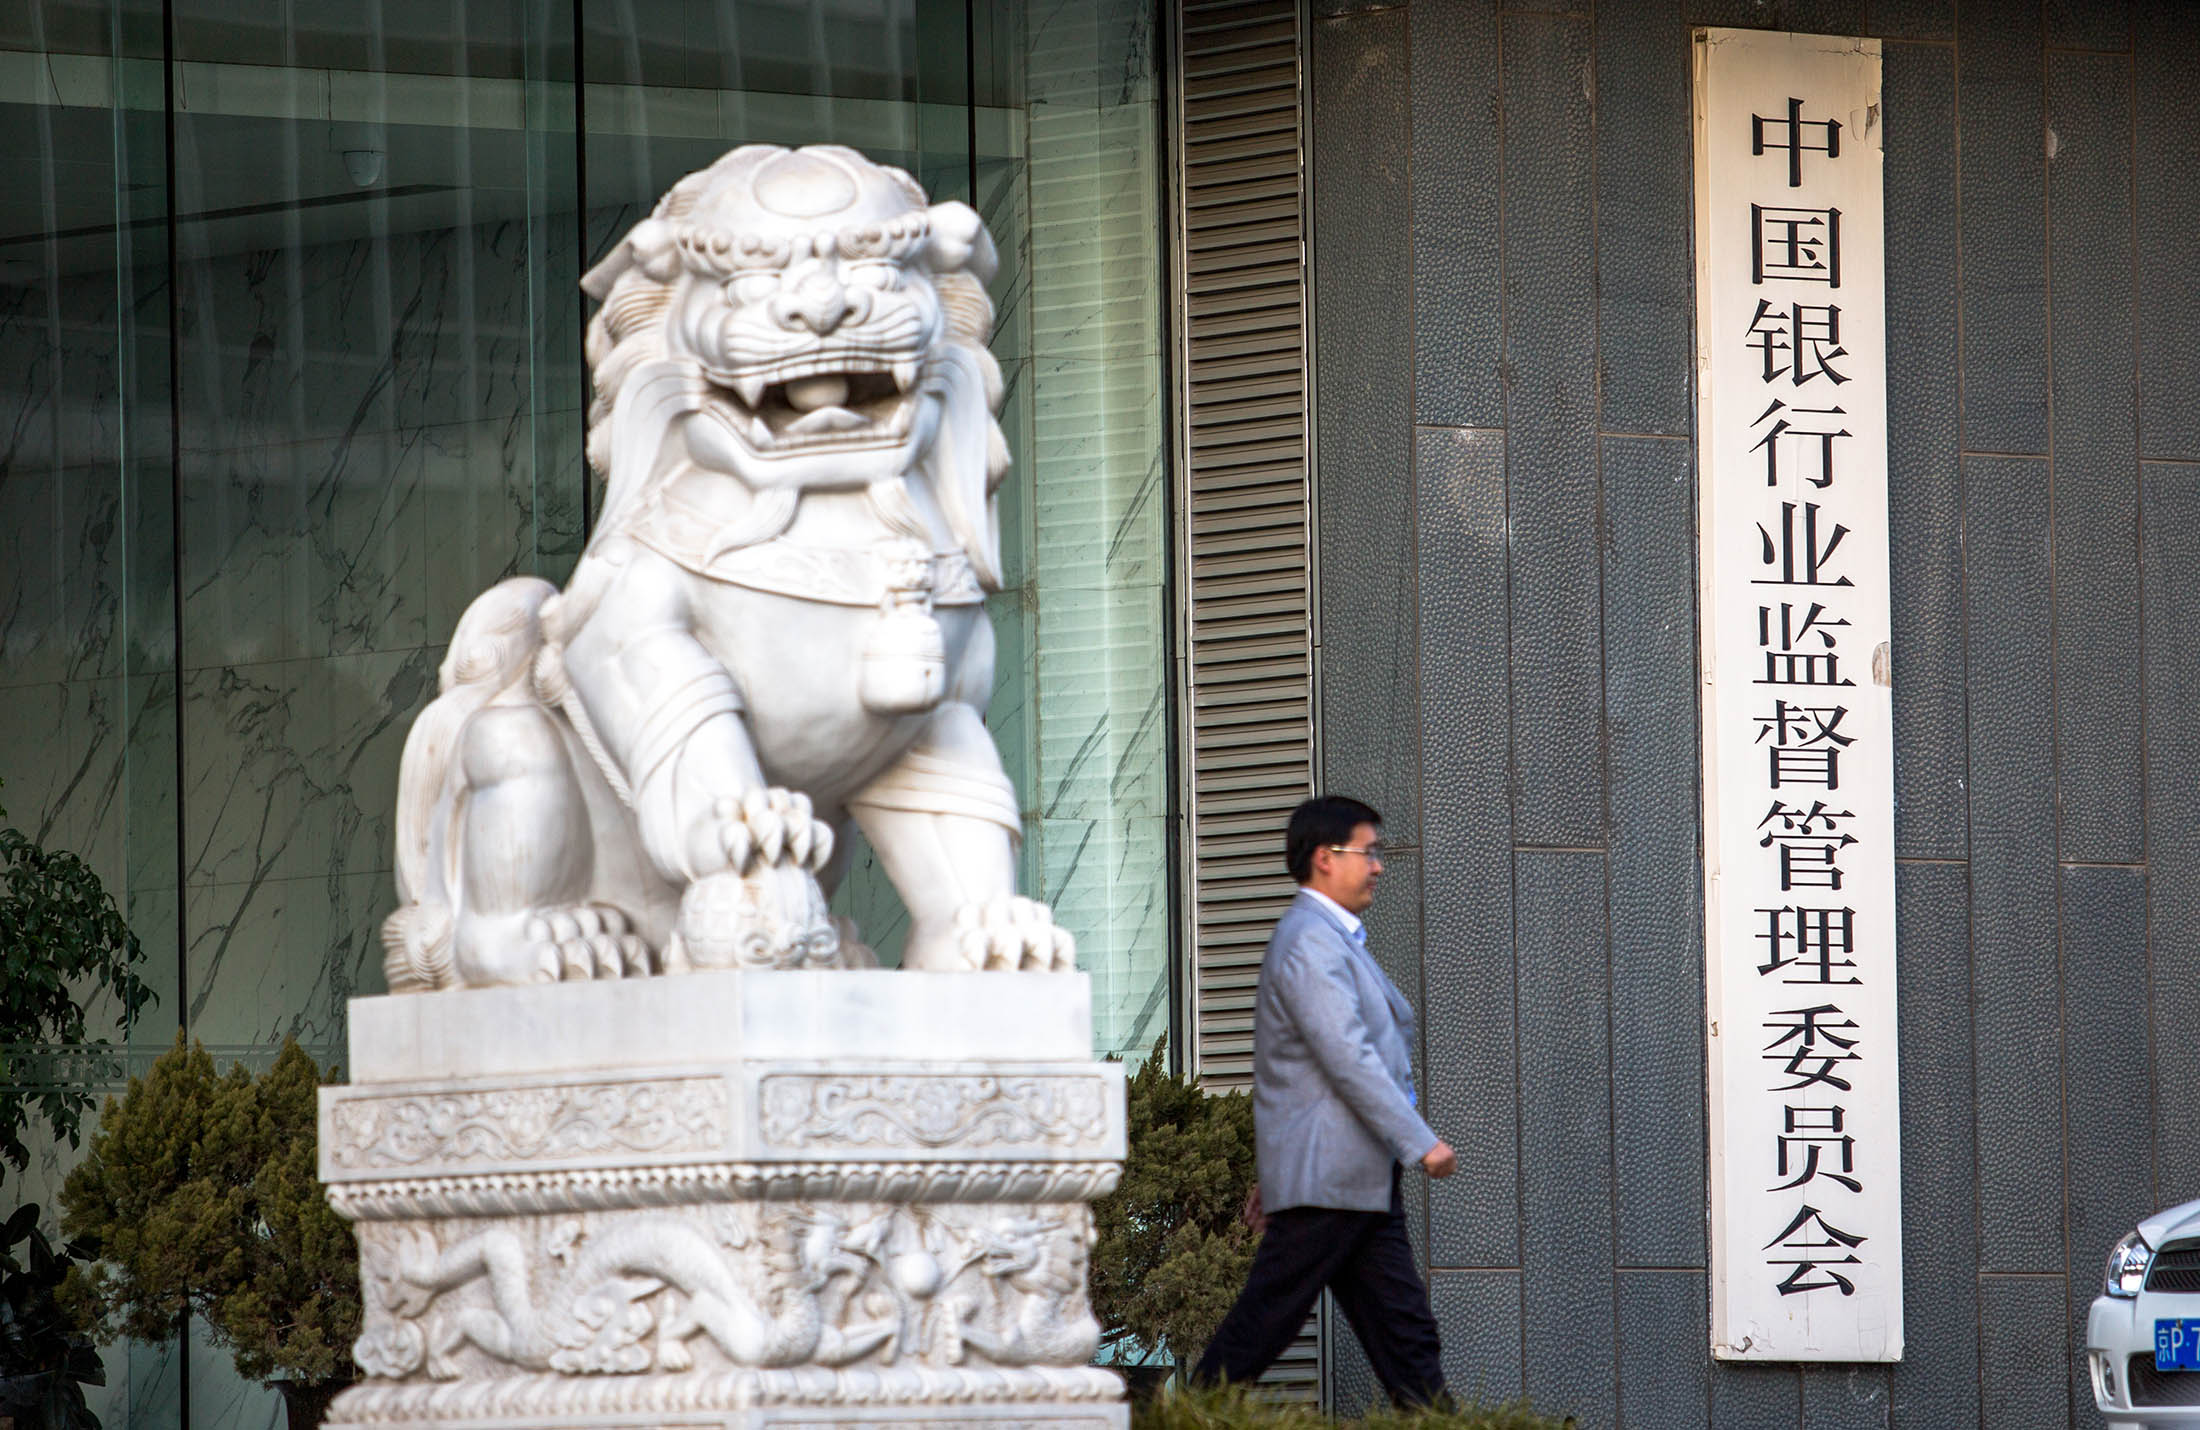 Marble lion sits in front of China Banking Regulatory Commission (CBRC) building.
